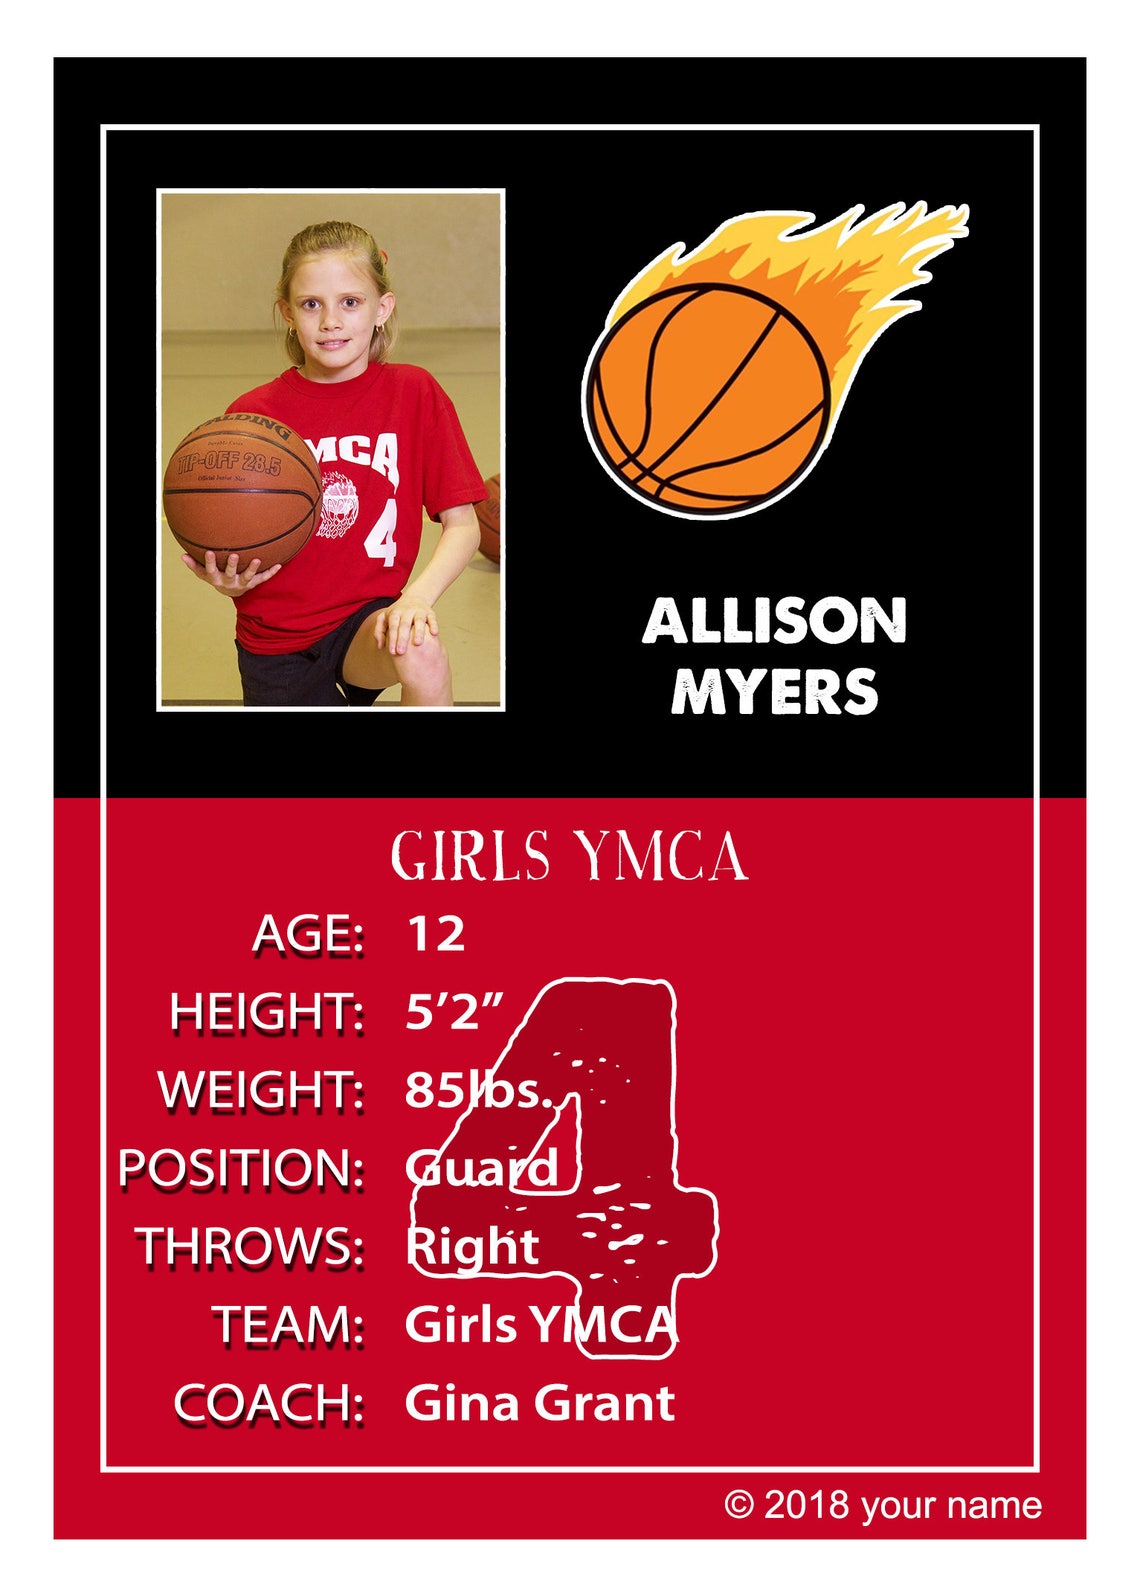 2020-basketball-card-template-perfect-for-trading-cards-for-etsy